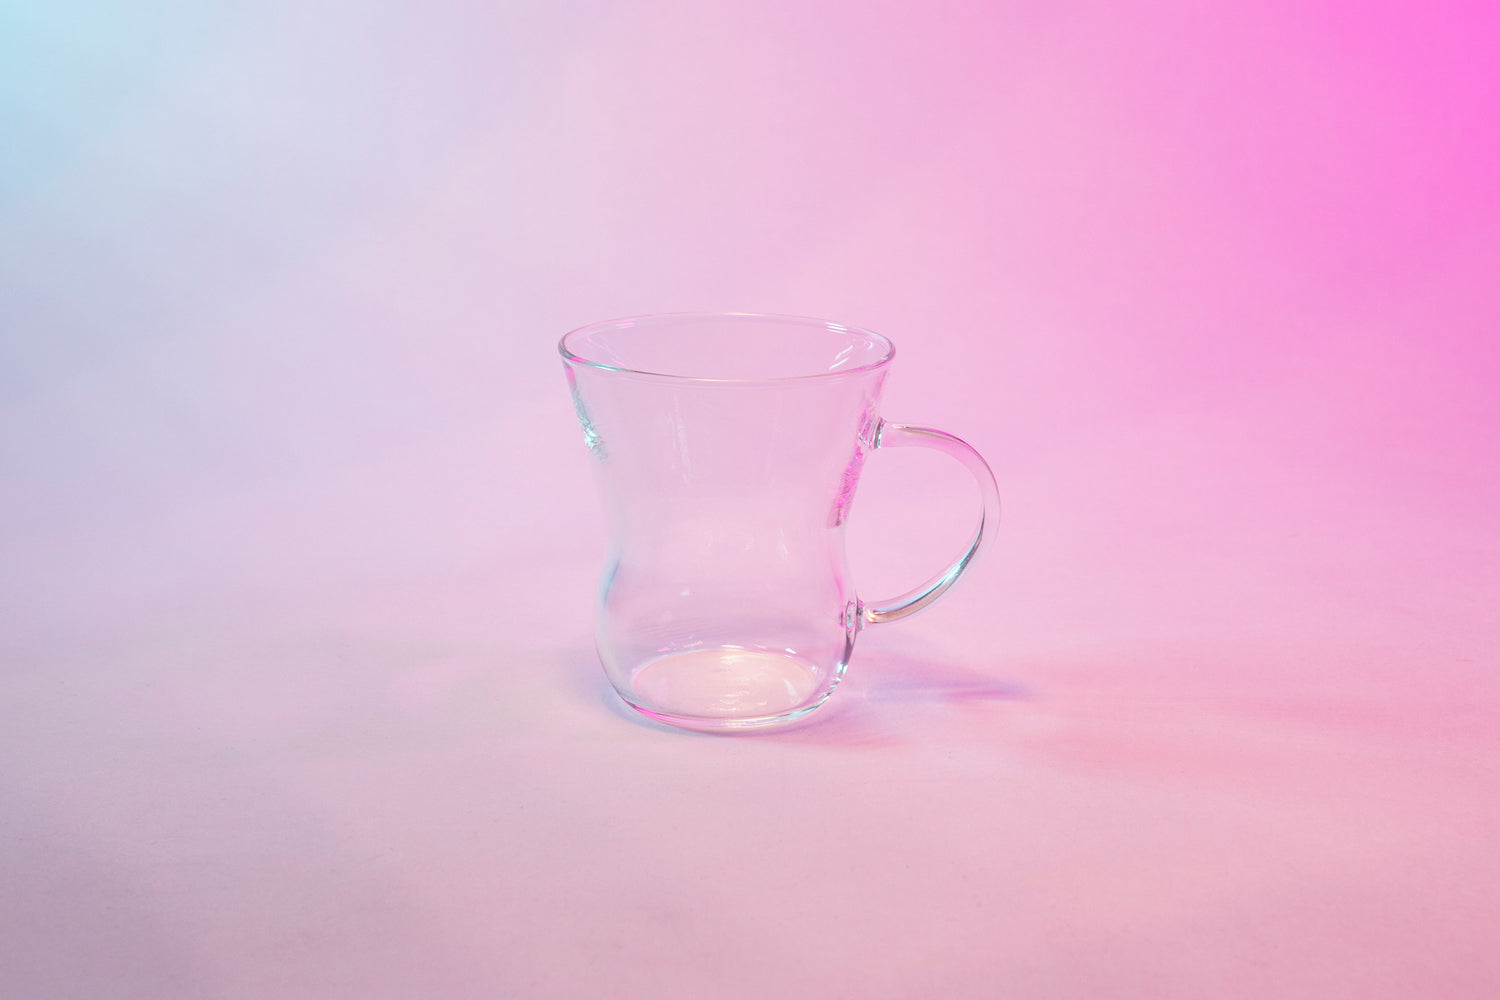 Clear glass tapered mug with full glass handle against a background with blue to violet gradient.